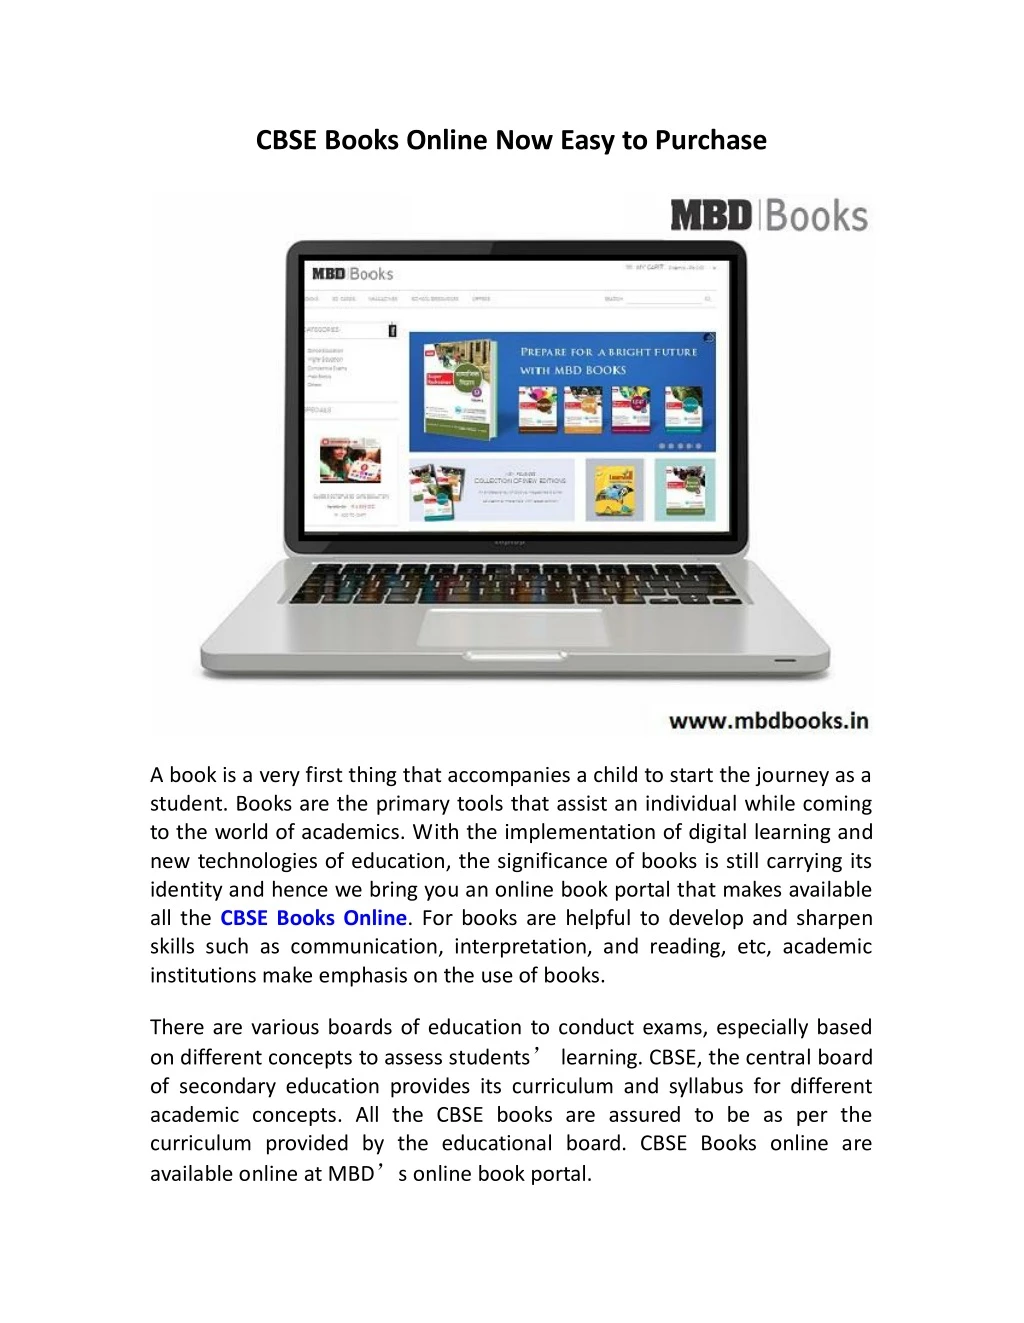 cbse books online now easy to purchase